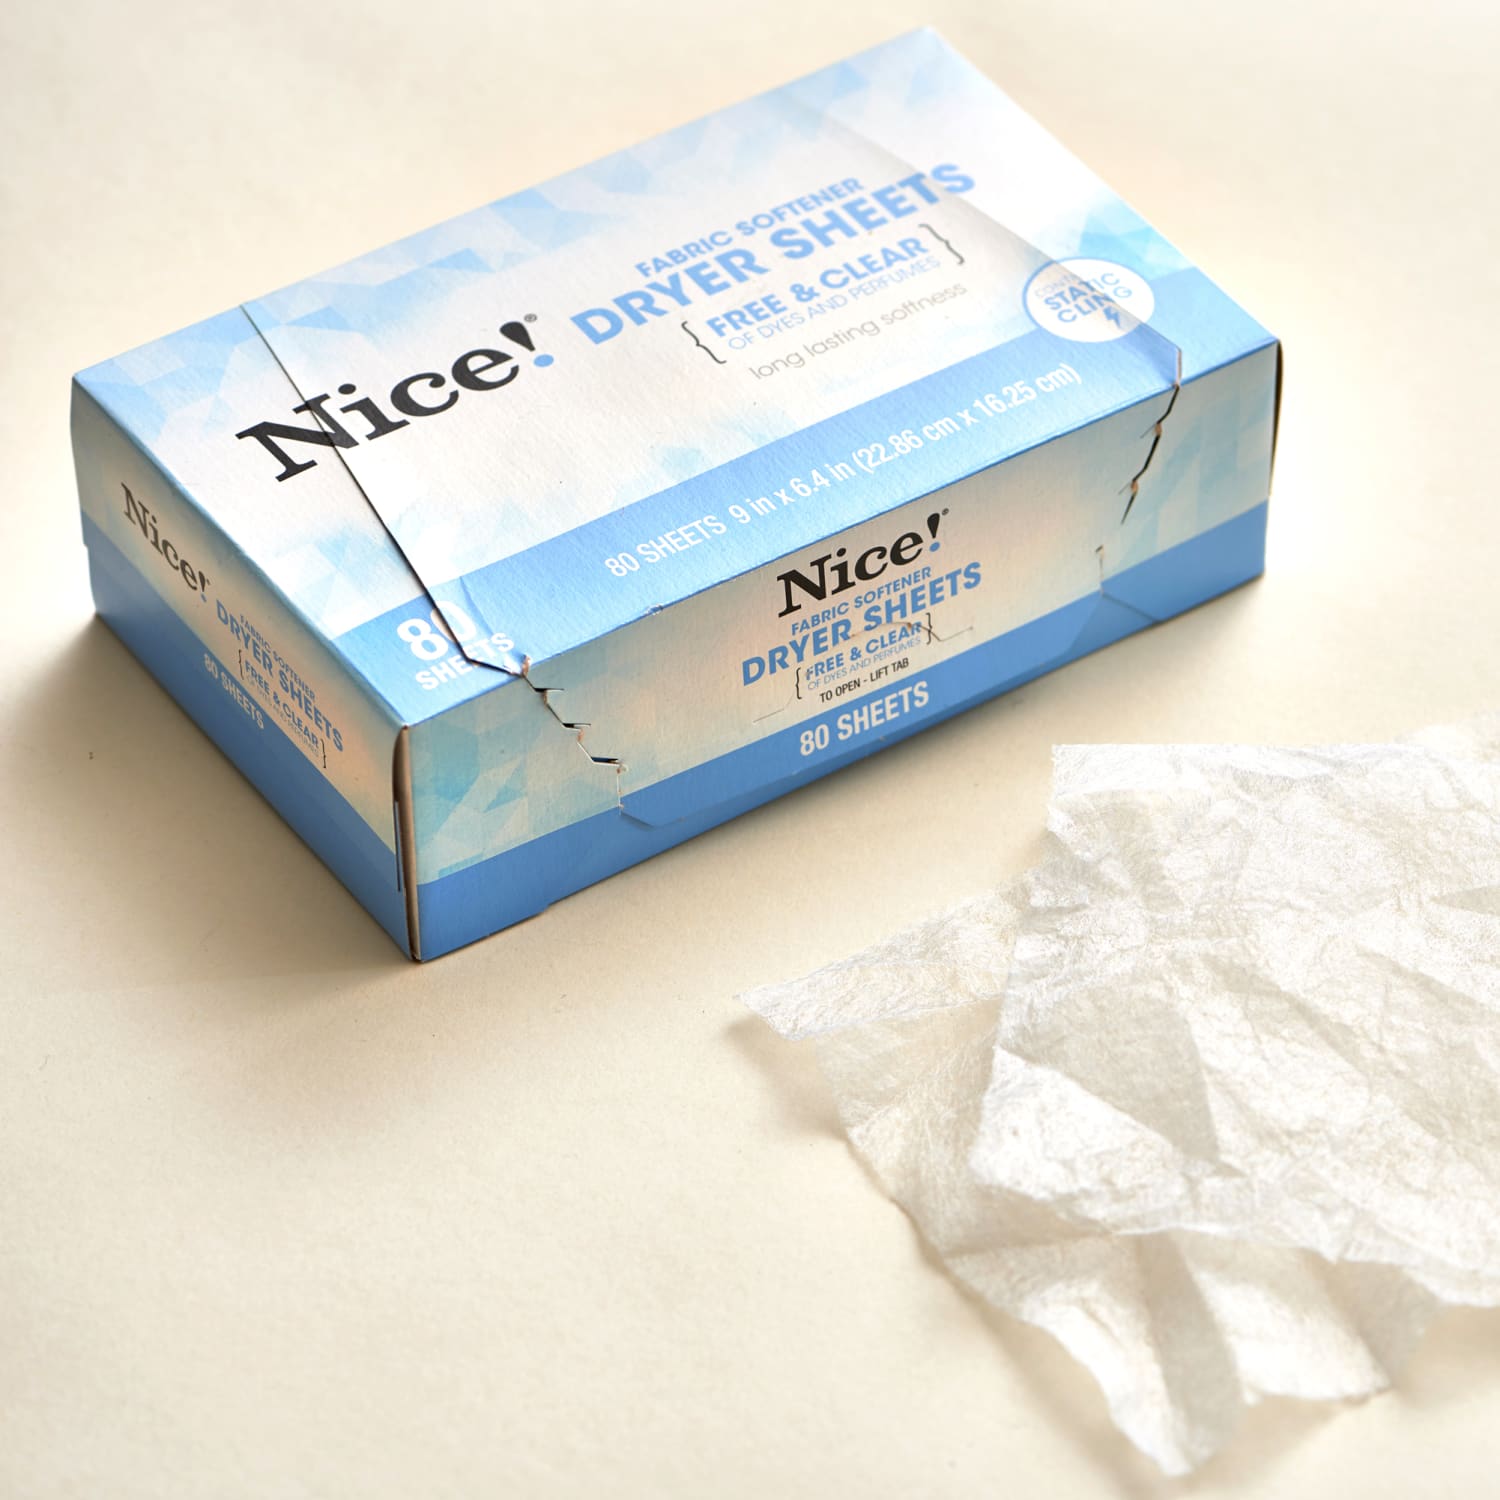 Here's Why You Should Stop Using Dryer Sheets and a Few Alternatives